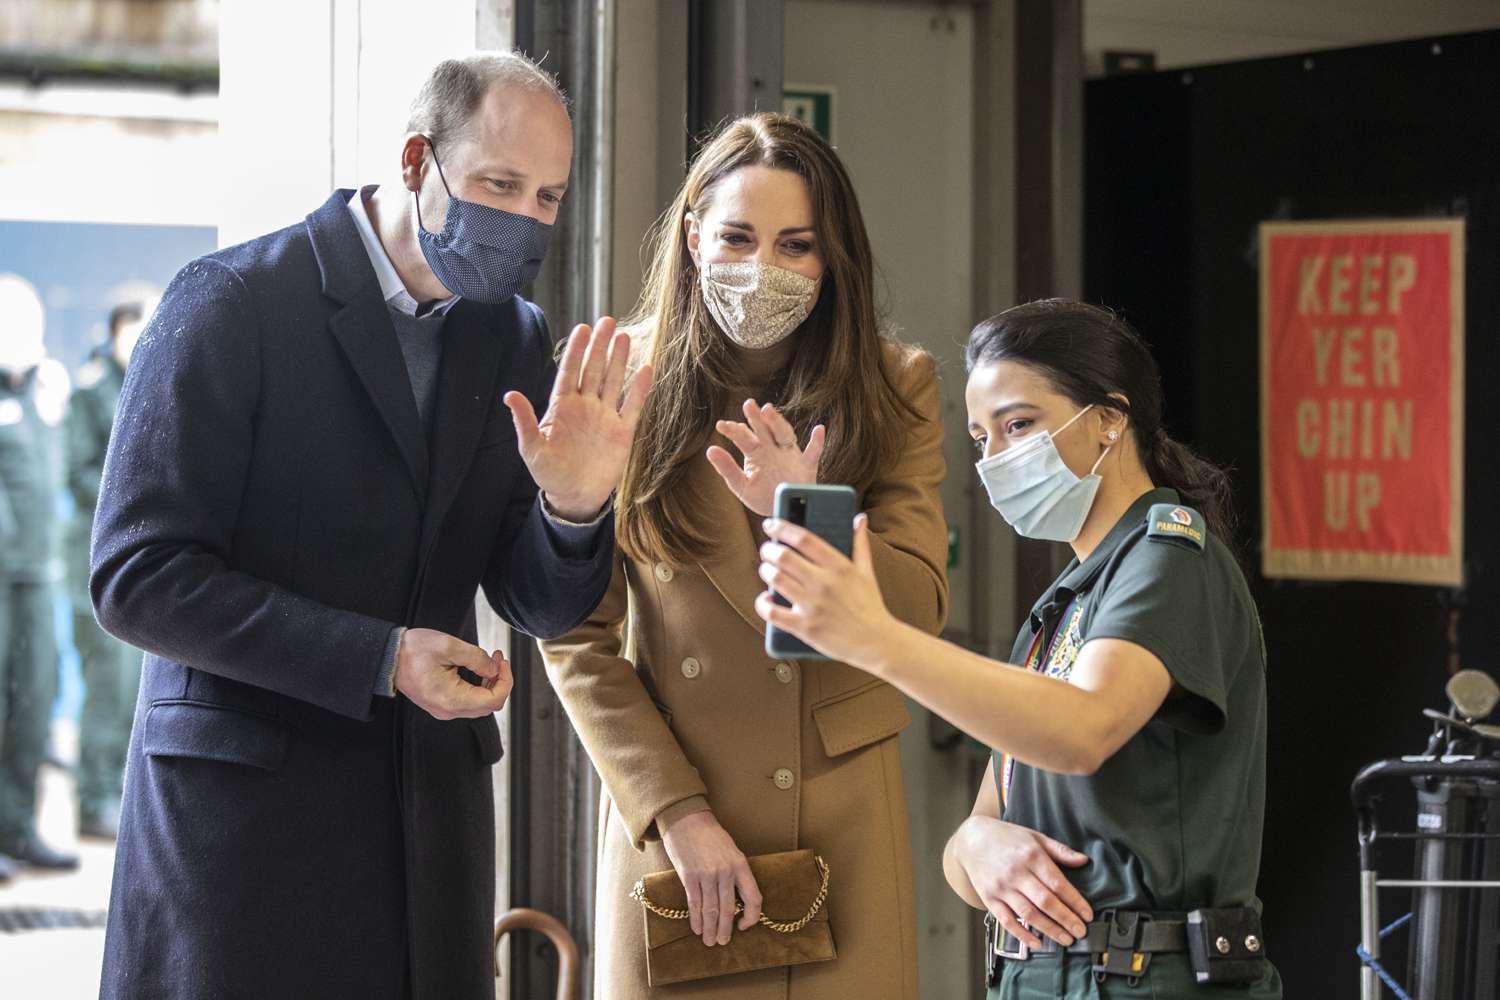 The Duke and Duchess of Cambridge during a visit to Newham ambulance station